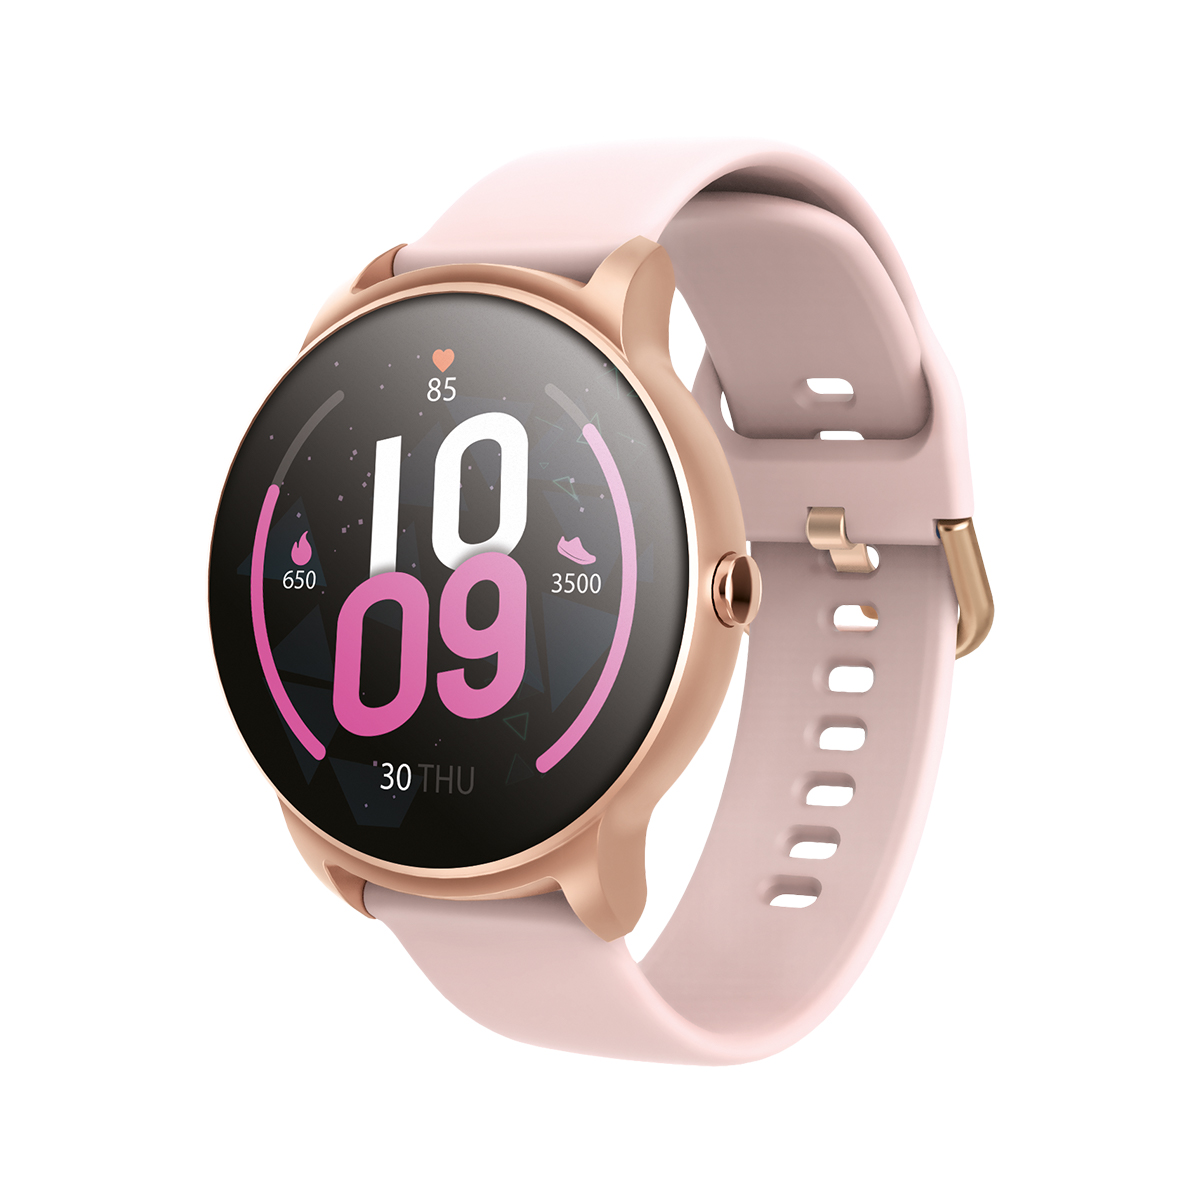 Forever smartwatch ForeVive 2 SB-330 rowe zoto / 6